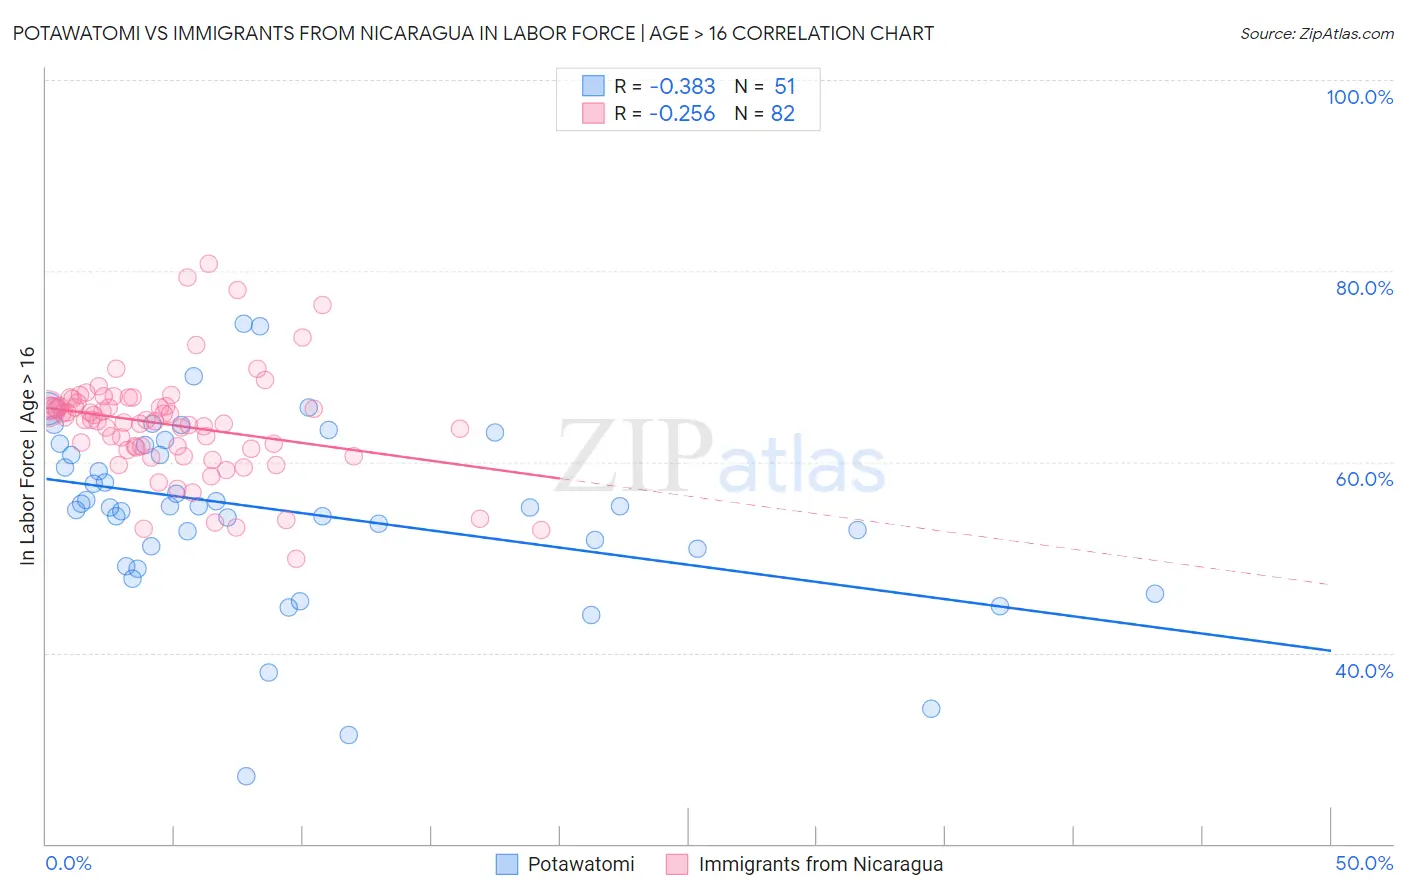 Potawatomi vs Immigrants from Nicaragua In Labor Force | Age > 16